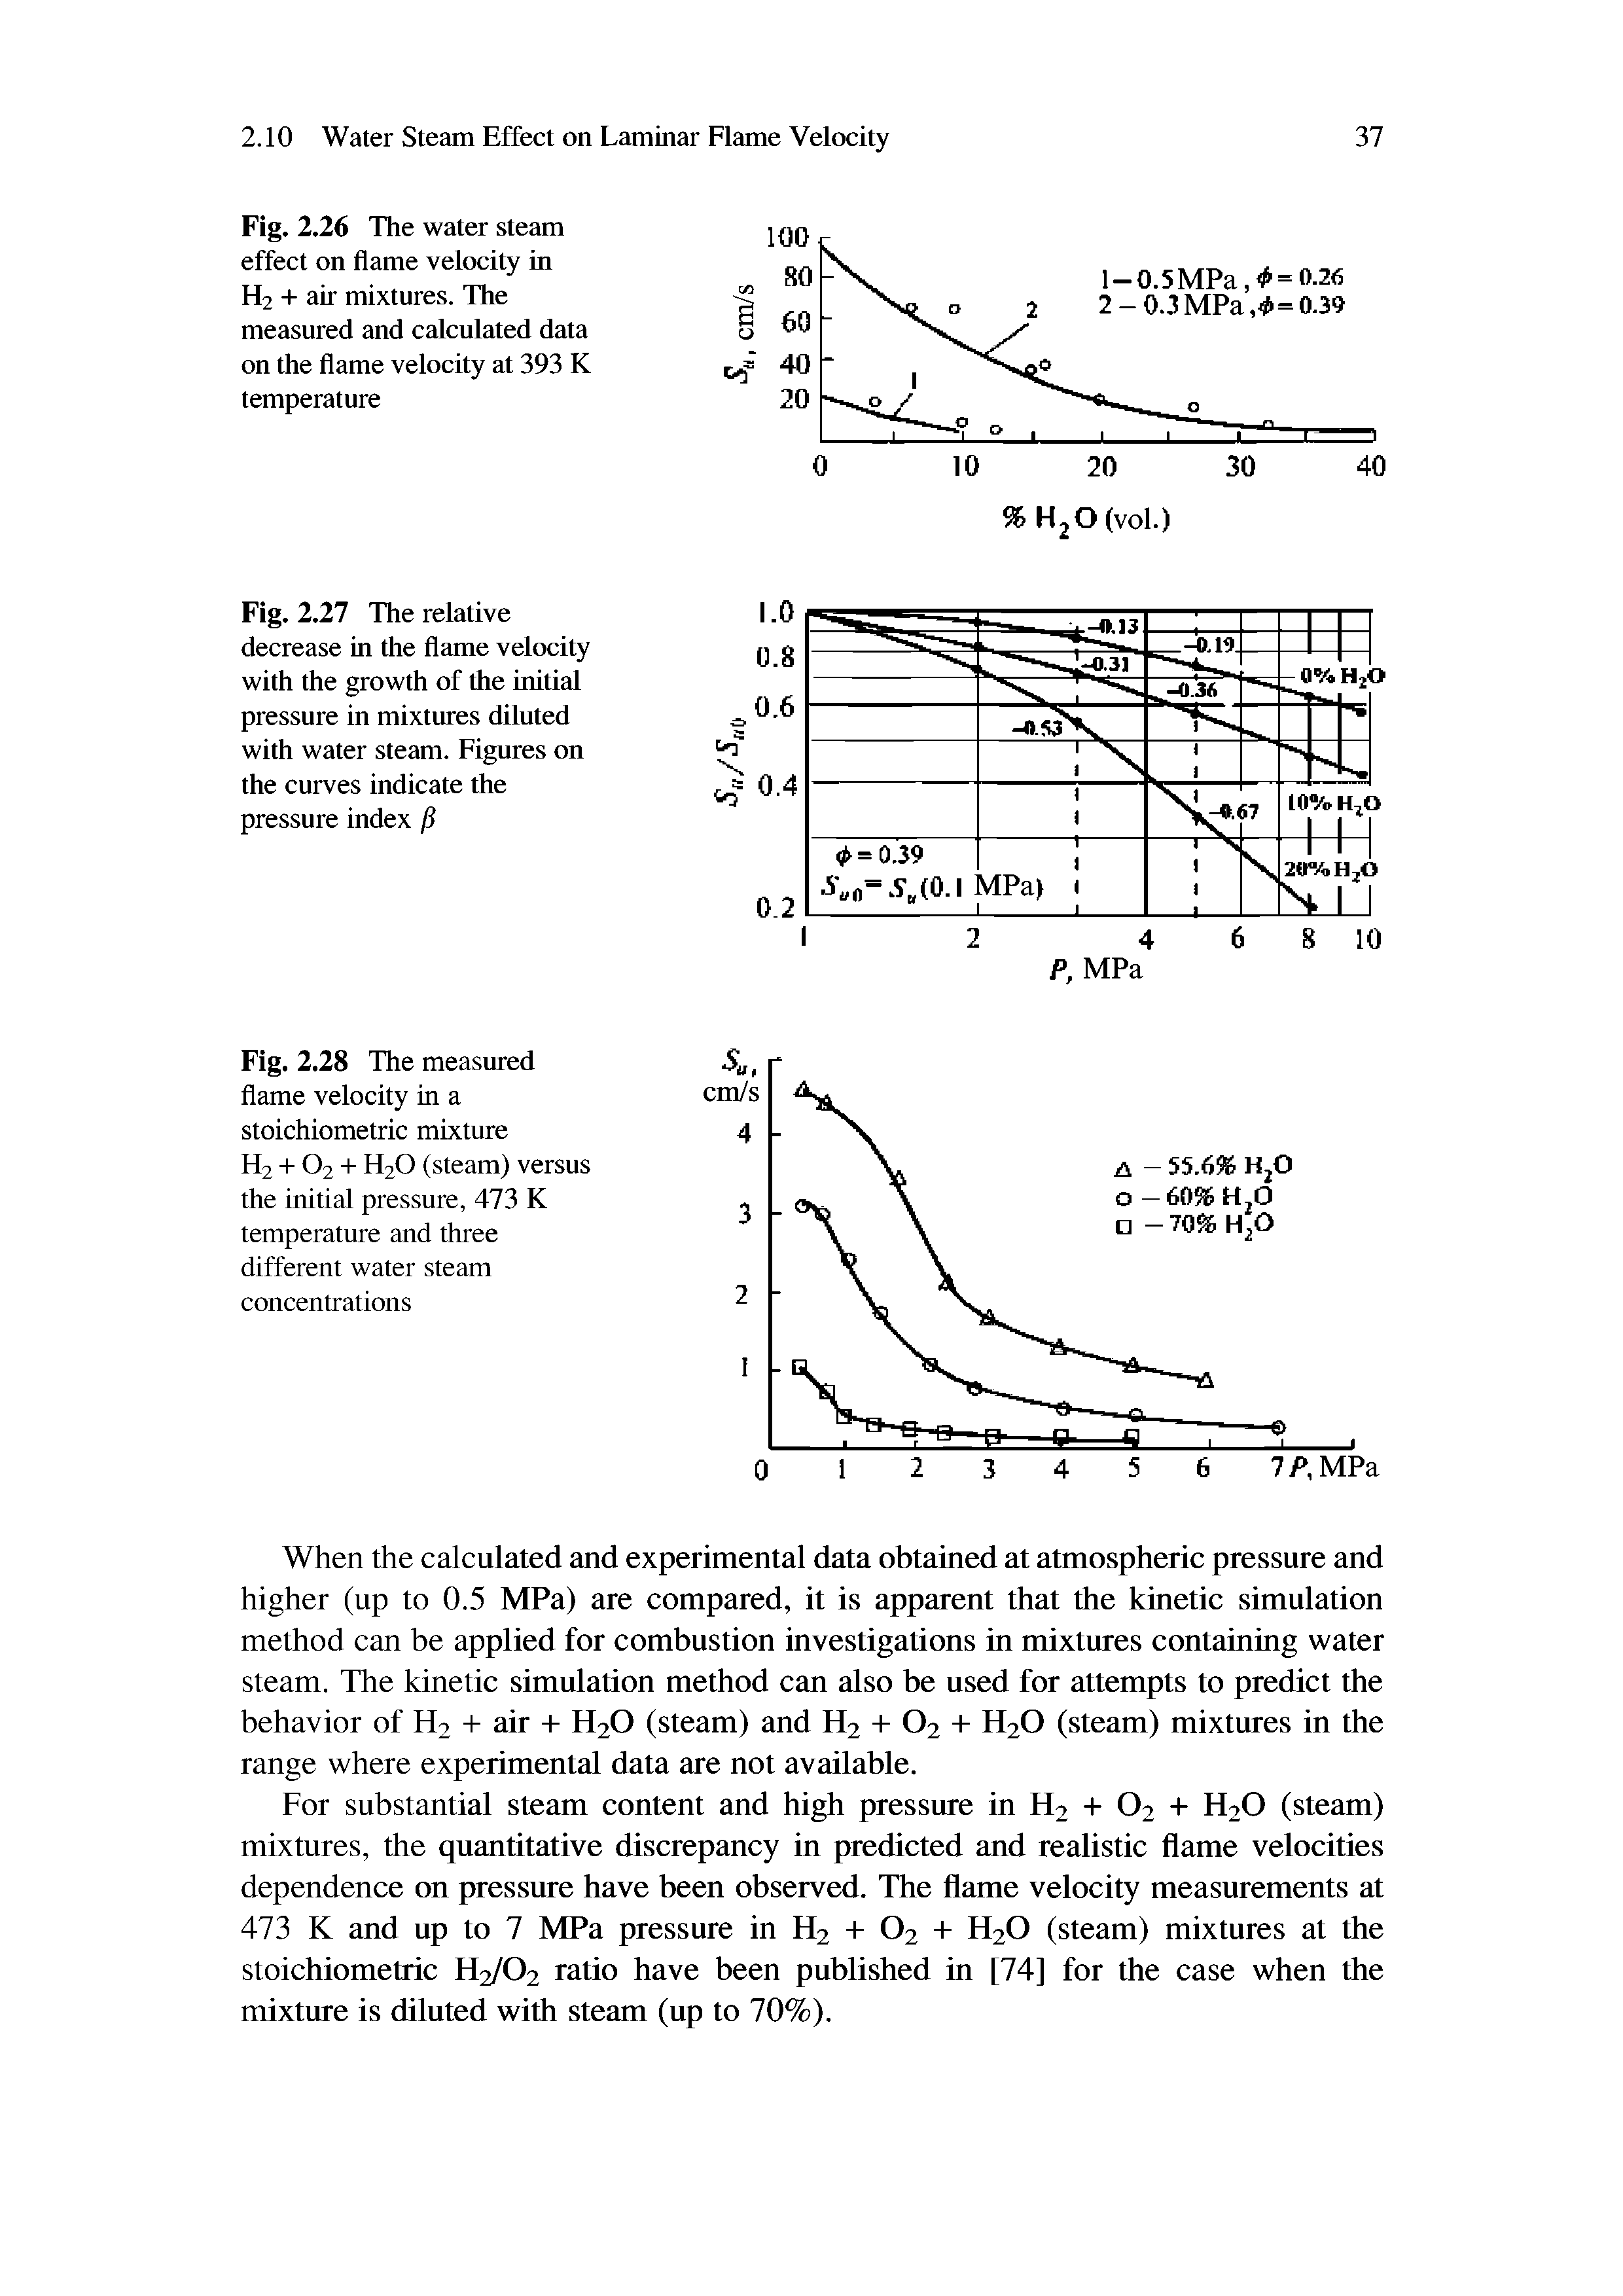 Fig. 2.27 The relative decrease in the flame velocity with the growth of the initial pressure in mixtures diluted with water steam. Figures on the curves indicate the pressure index P...